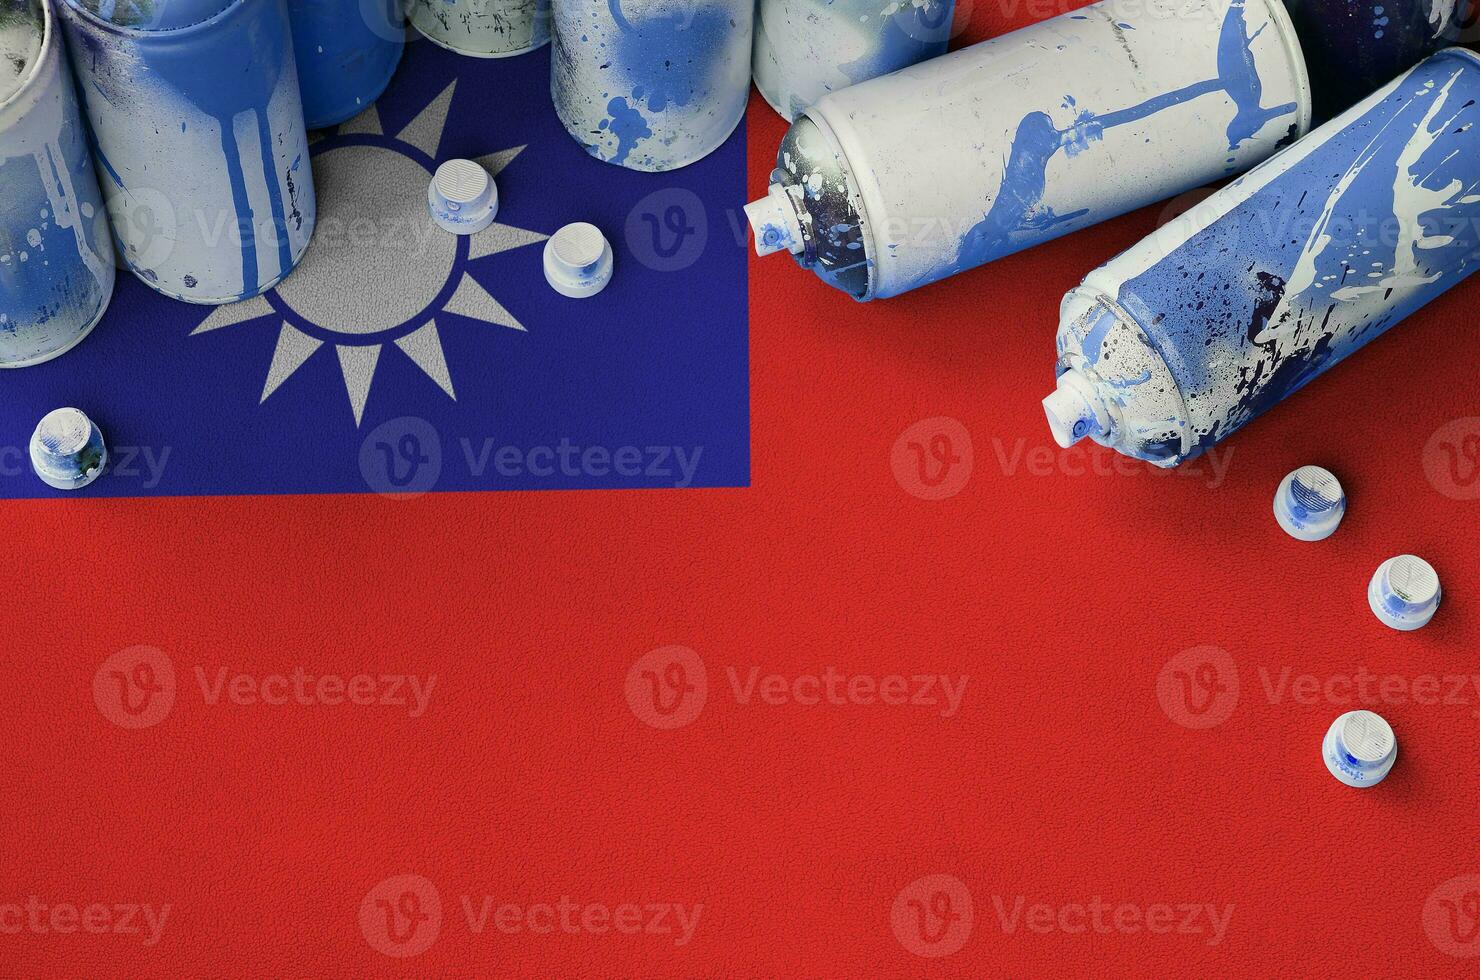 Taiwan flag and few used aerosol spray cans for graffiti painting. Street art culture concept photo